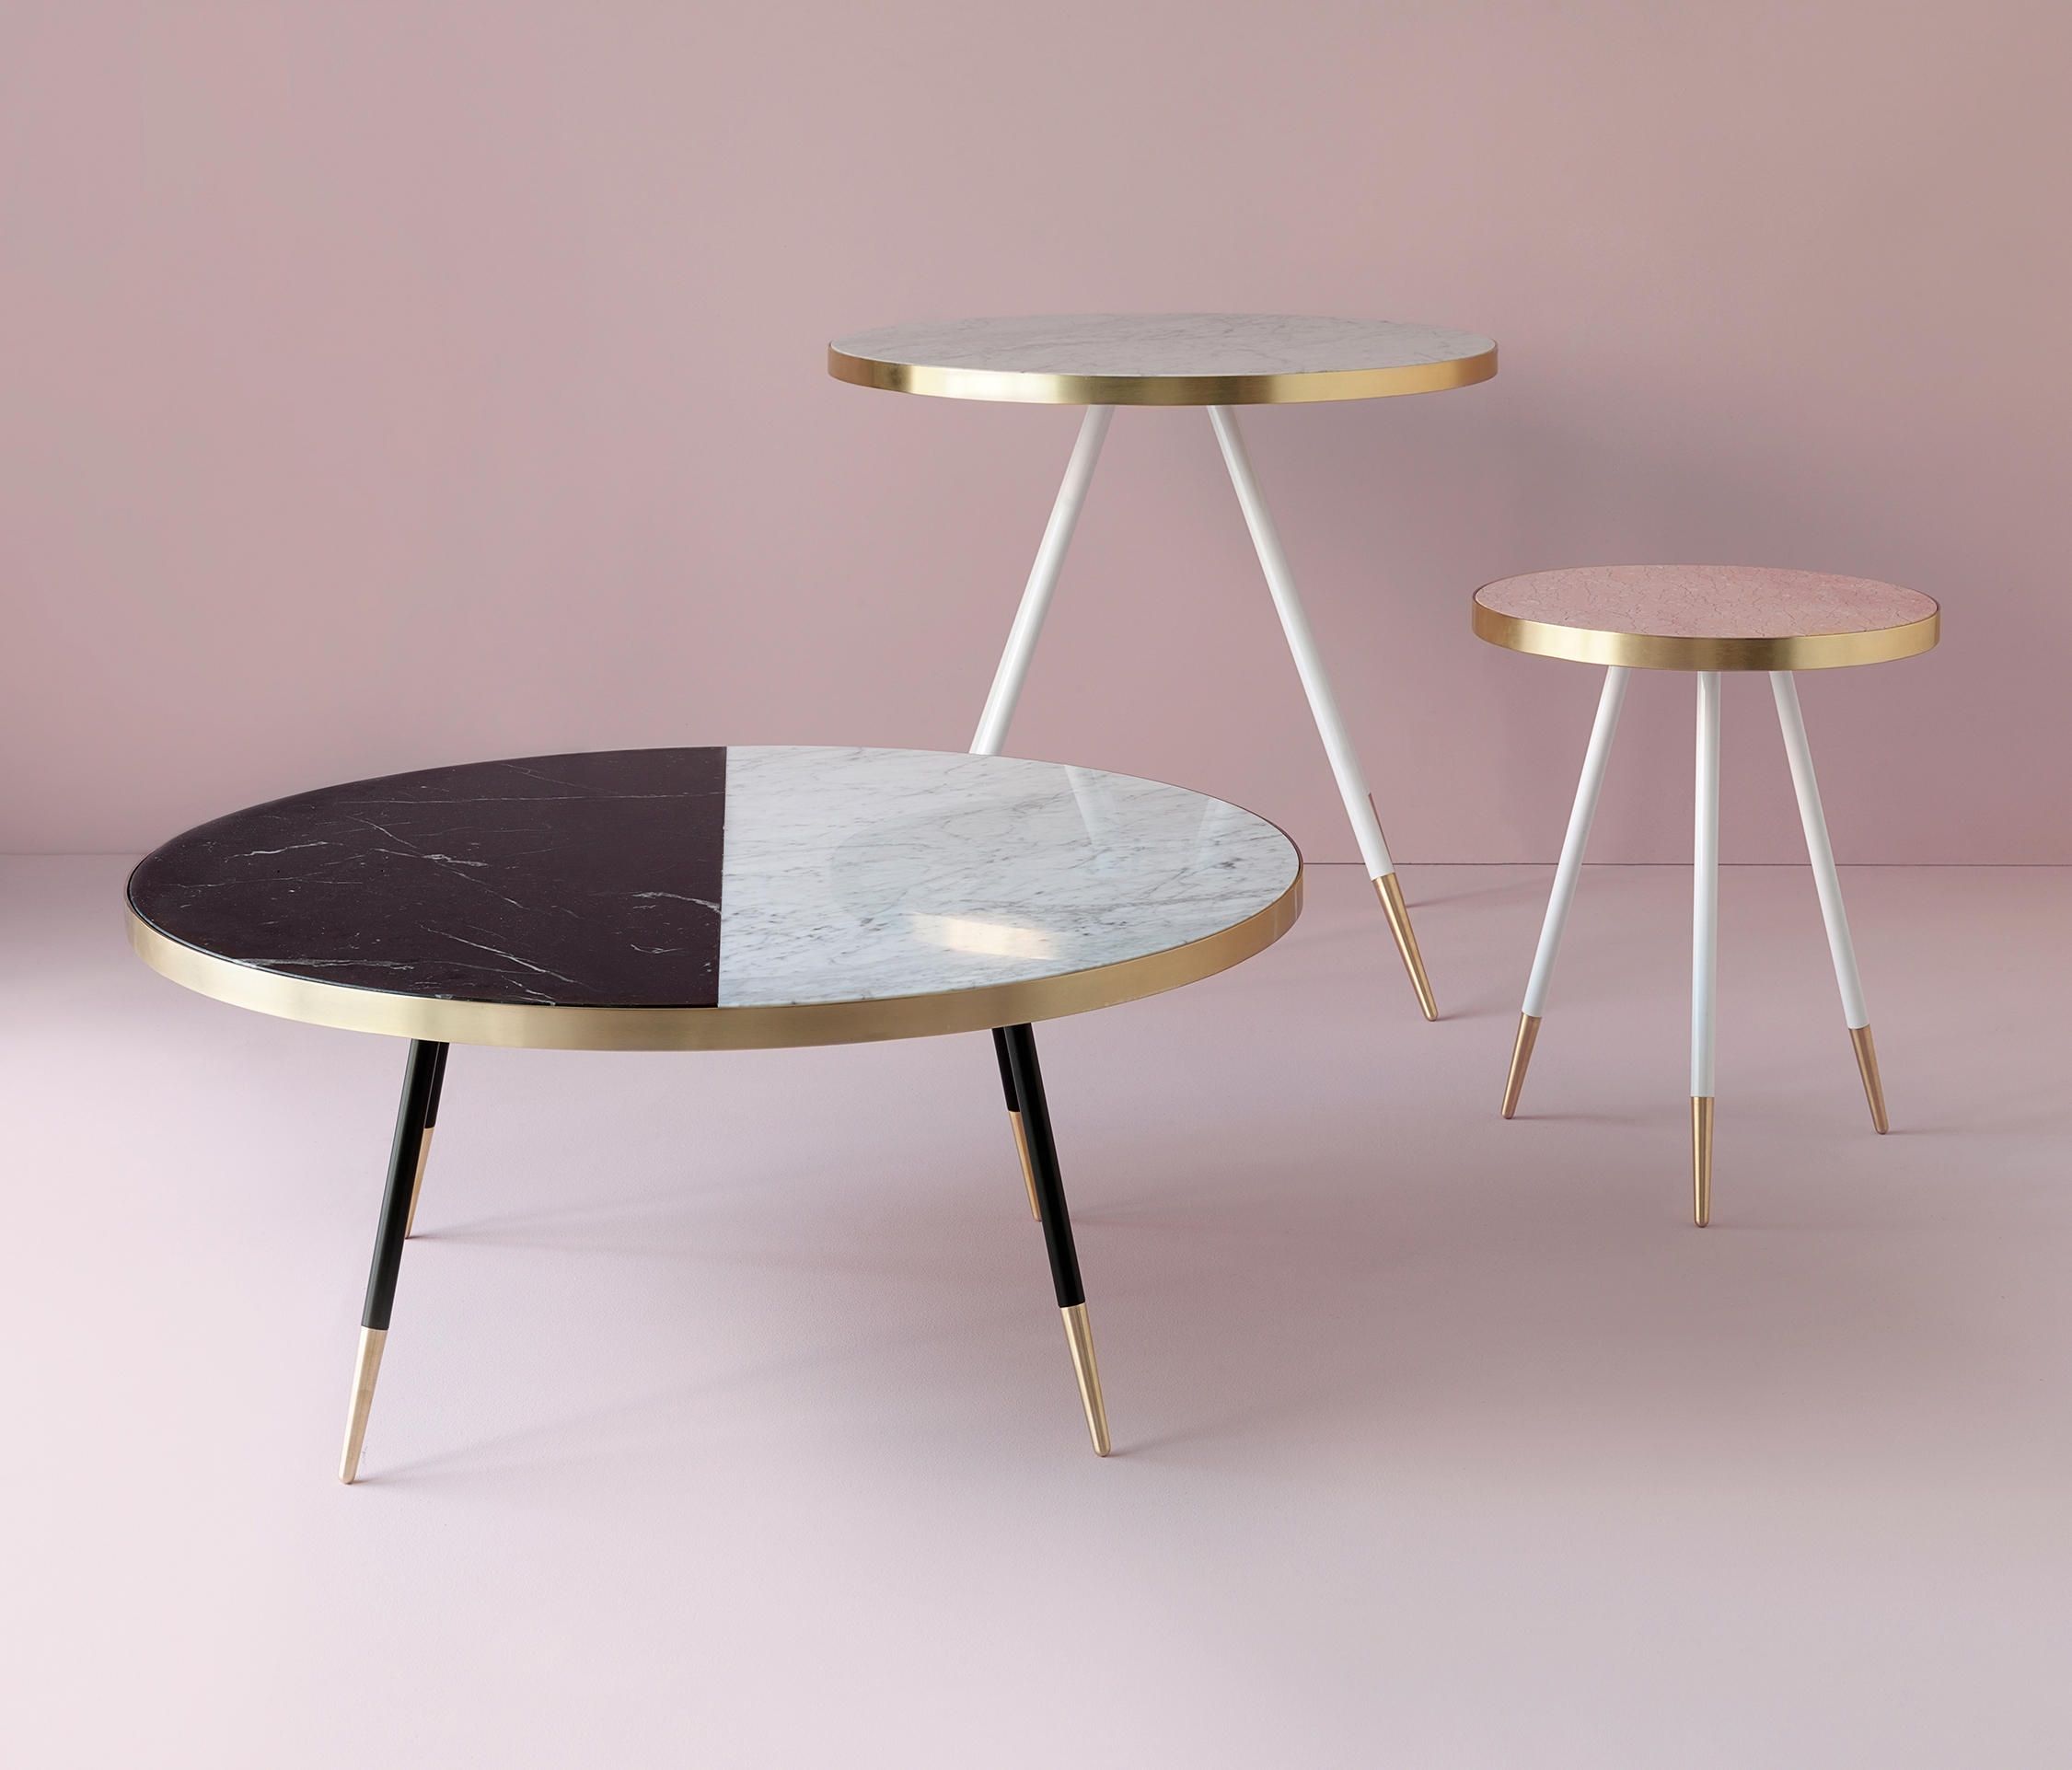 Band Marble Coffee Table – Coffee Tables From Bethan Gray | Architonic For 2 Tone Grey And White Marble Coffee Tables (View 15 of 30)